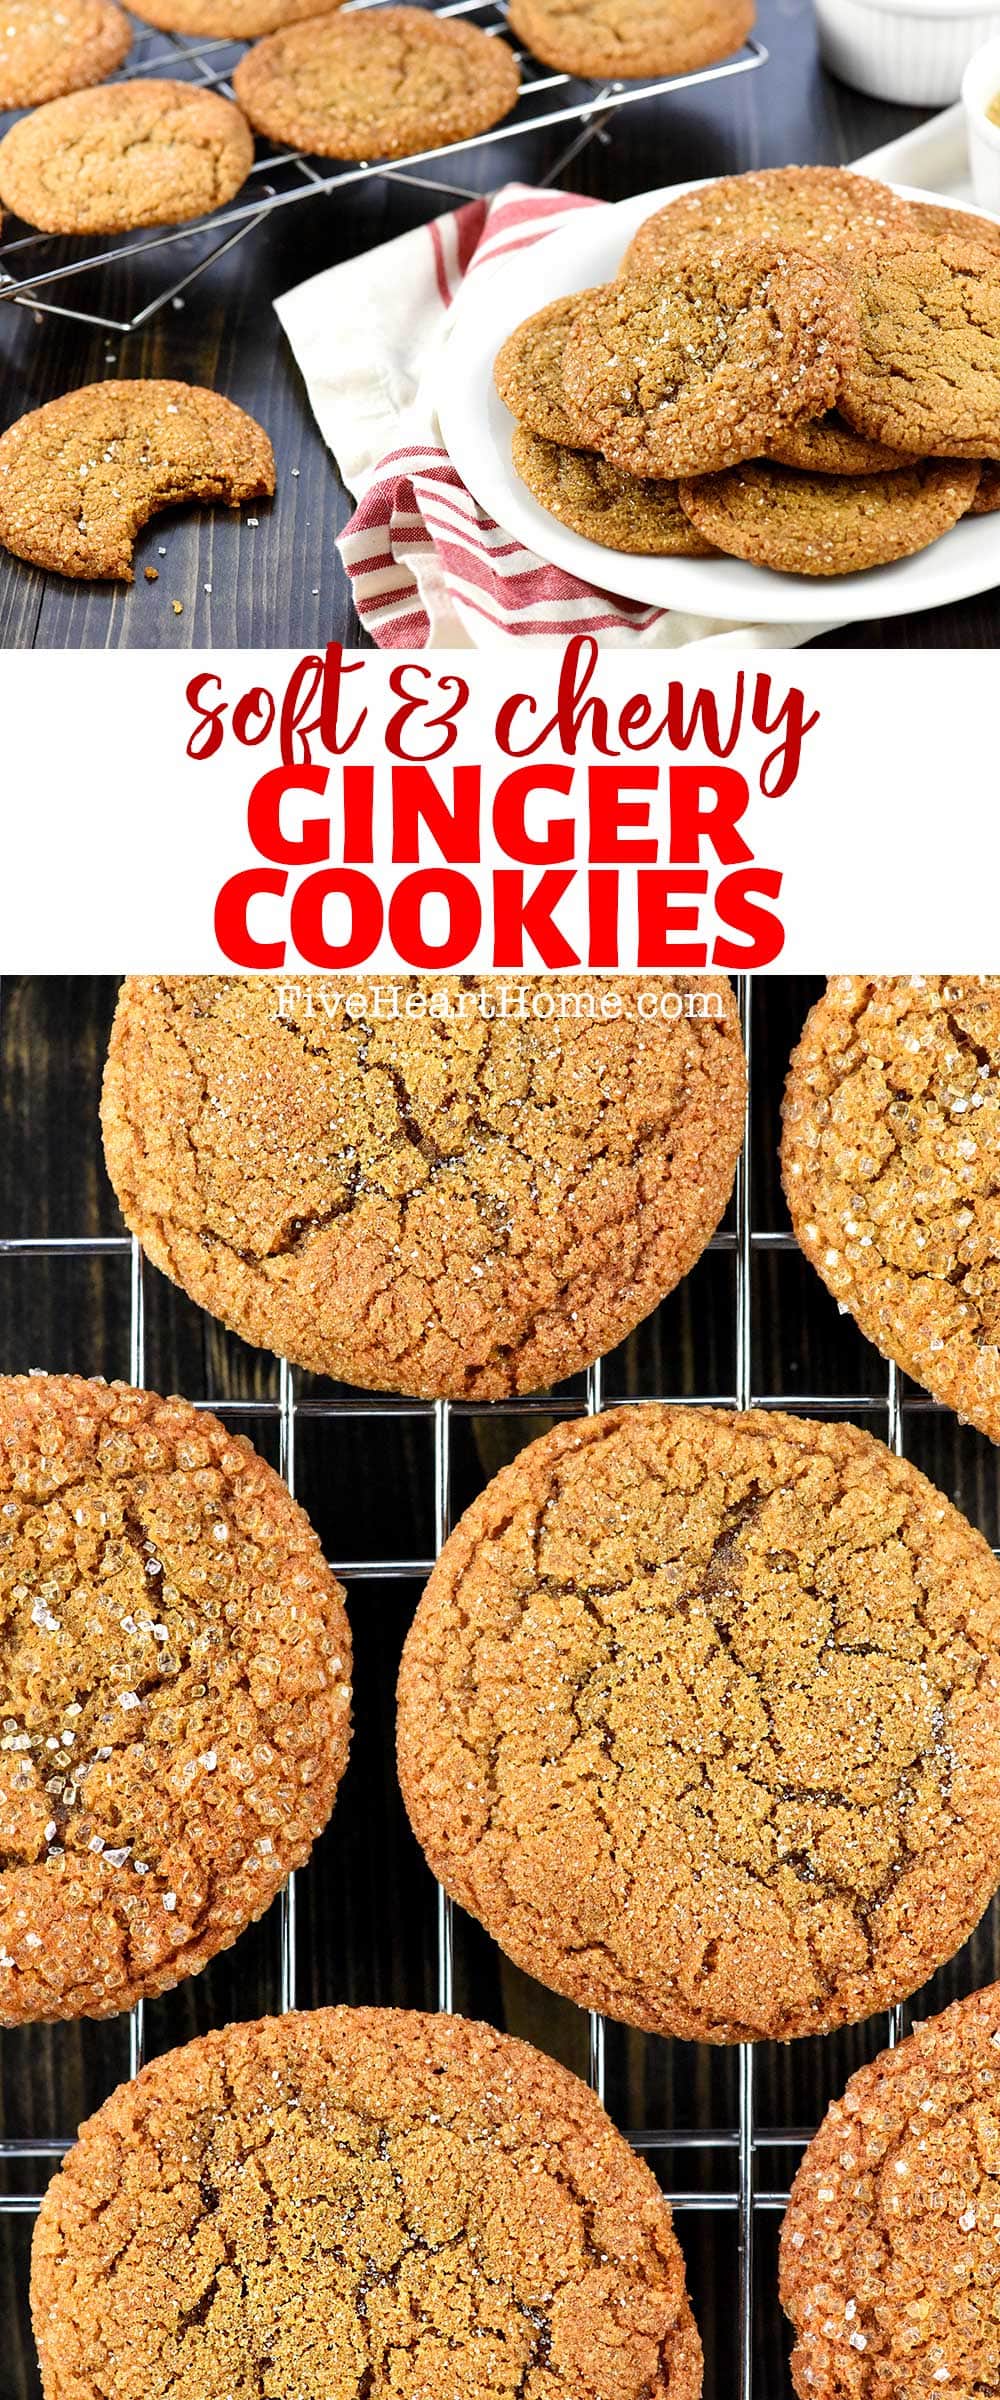 Ginger Cookies are loaded with molasses and warm spice and coated in crunchy sugar for soft, chewy, crinkly, sparkly Christmas cookies that are as pretty as they are delicious! | FiveHeartHome.com via @fivehearthome